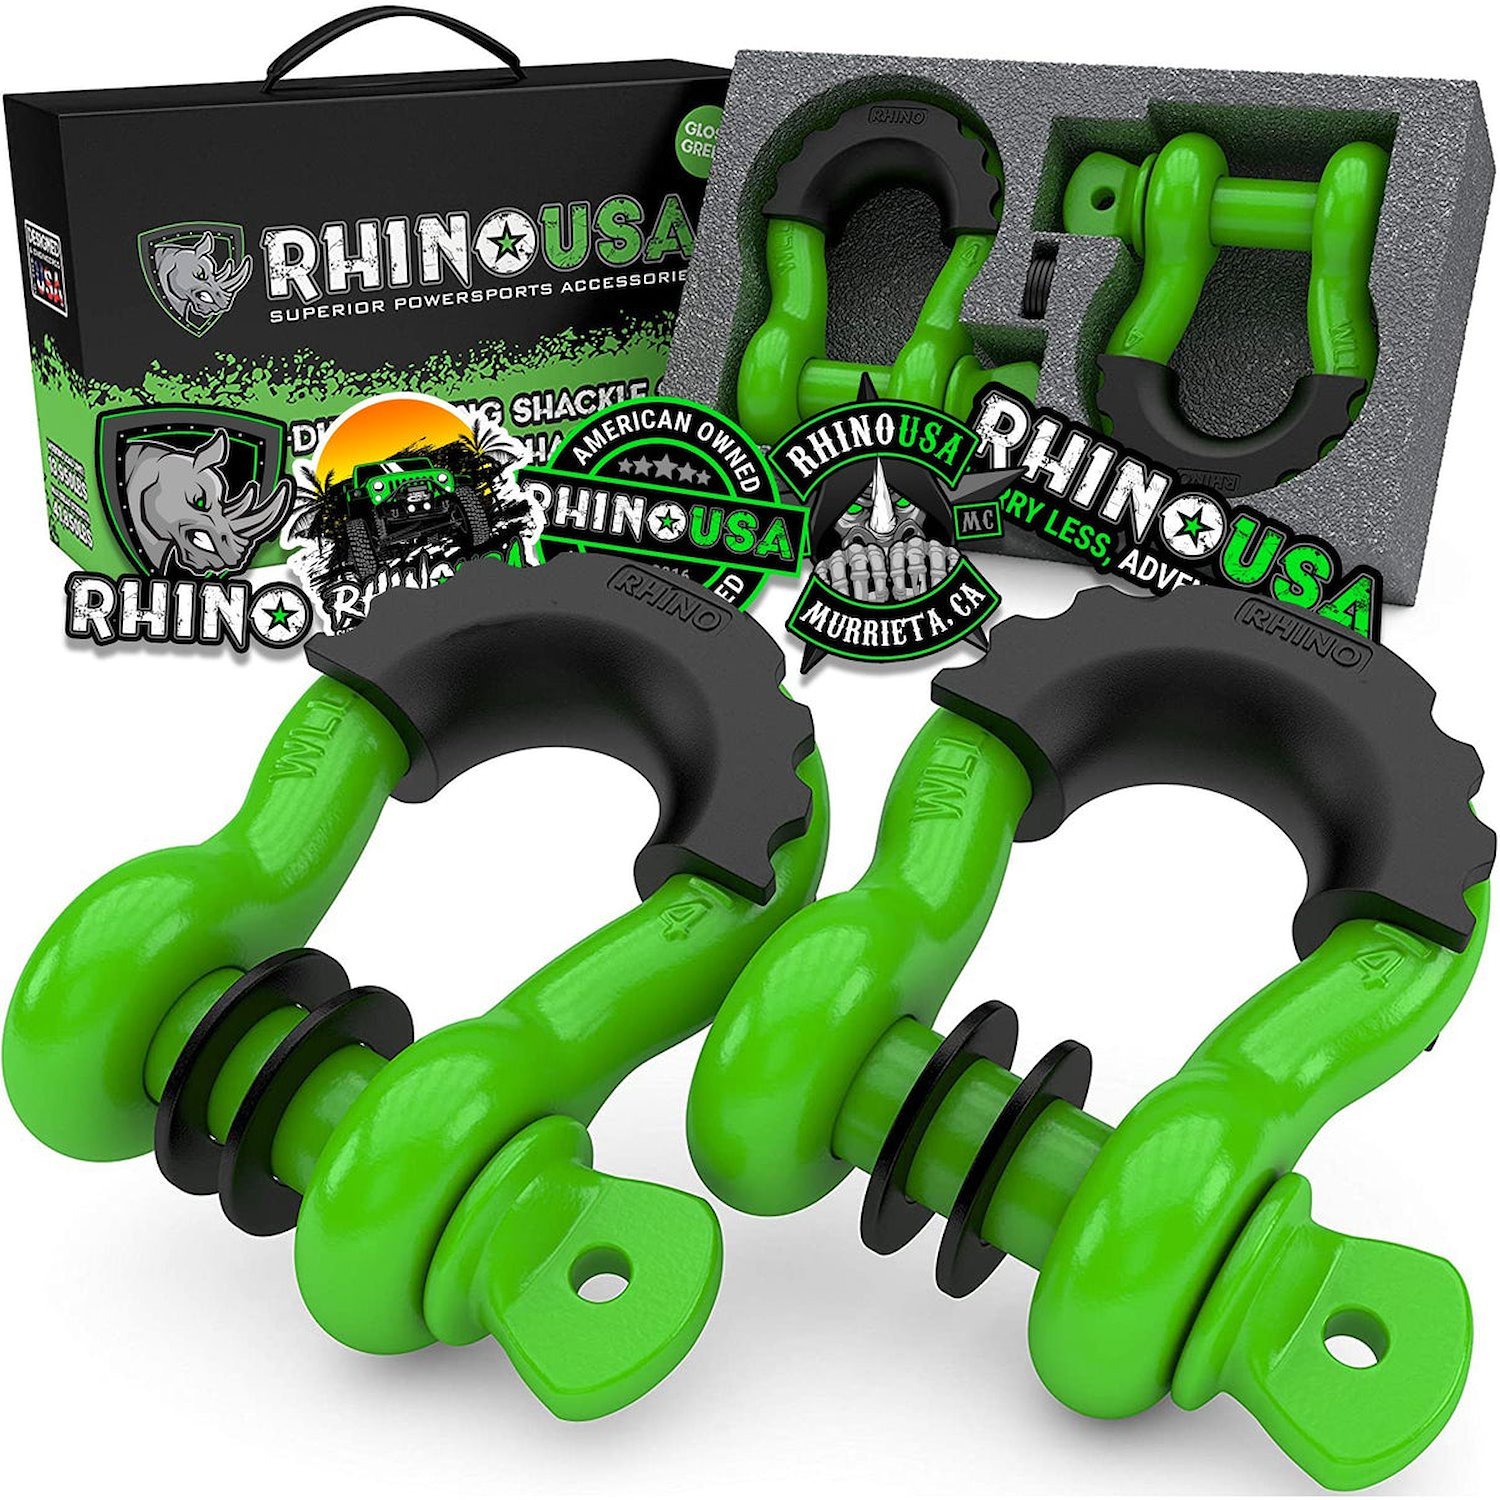 RNO-GRN-SHACKLES 3/4 in. D-Ring Shackle Set [Green, Set of 2]